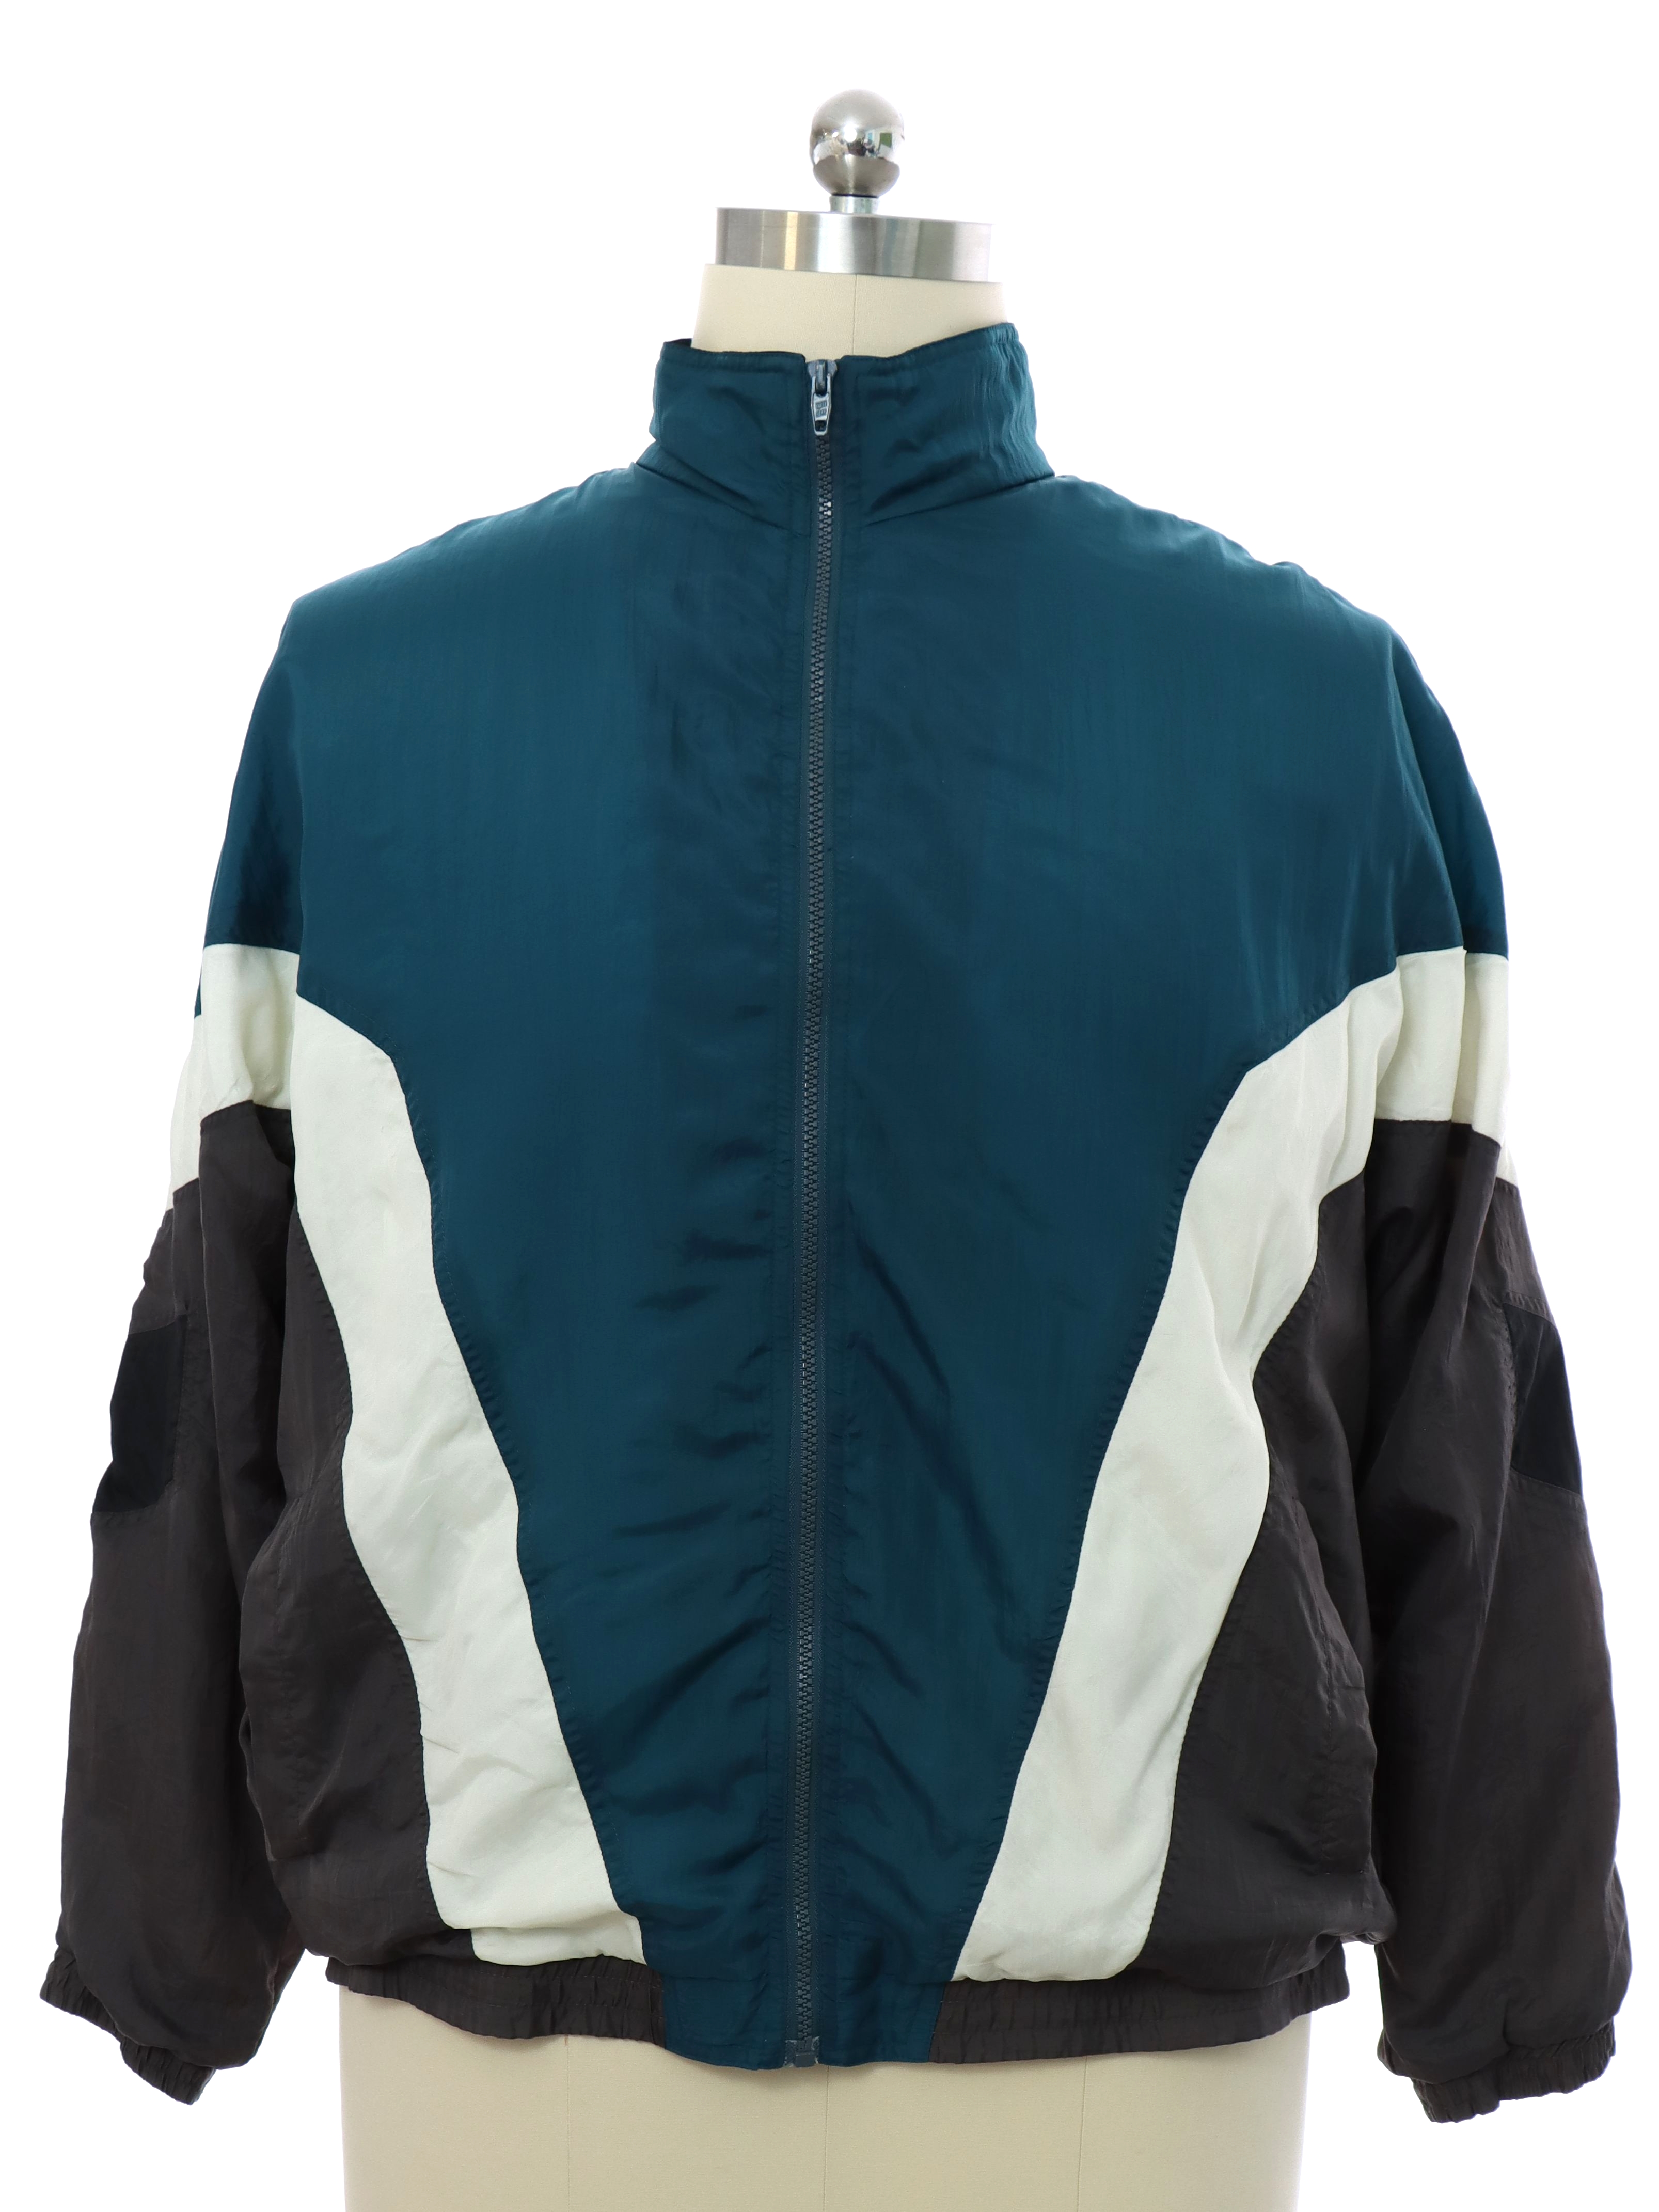 80s Retro Jacket: Late 80s -Missing Label- Mens teal, ivory, and ...